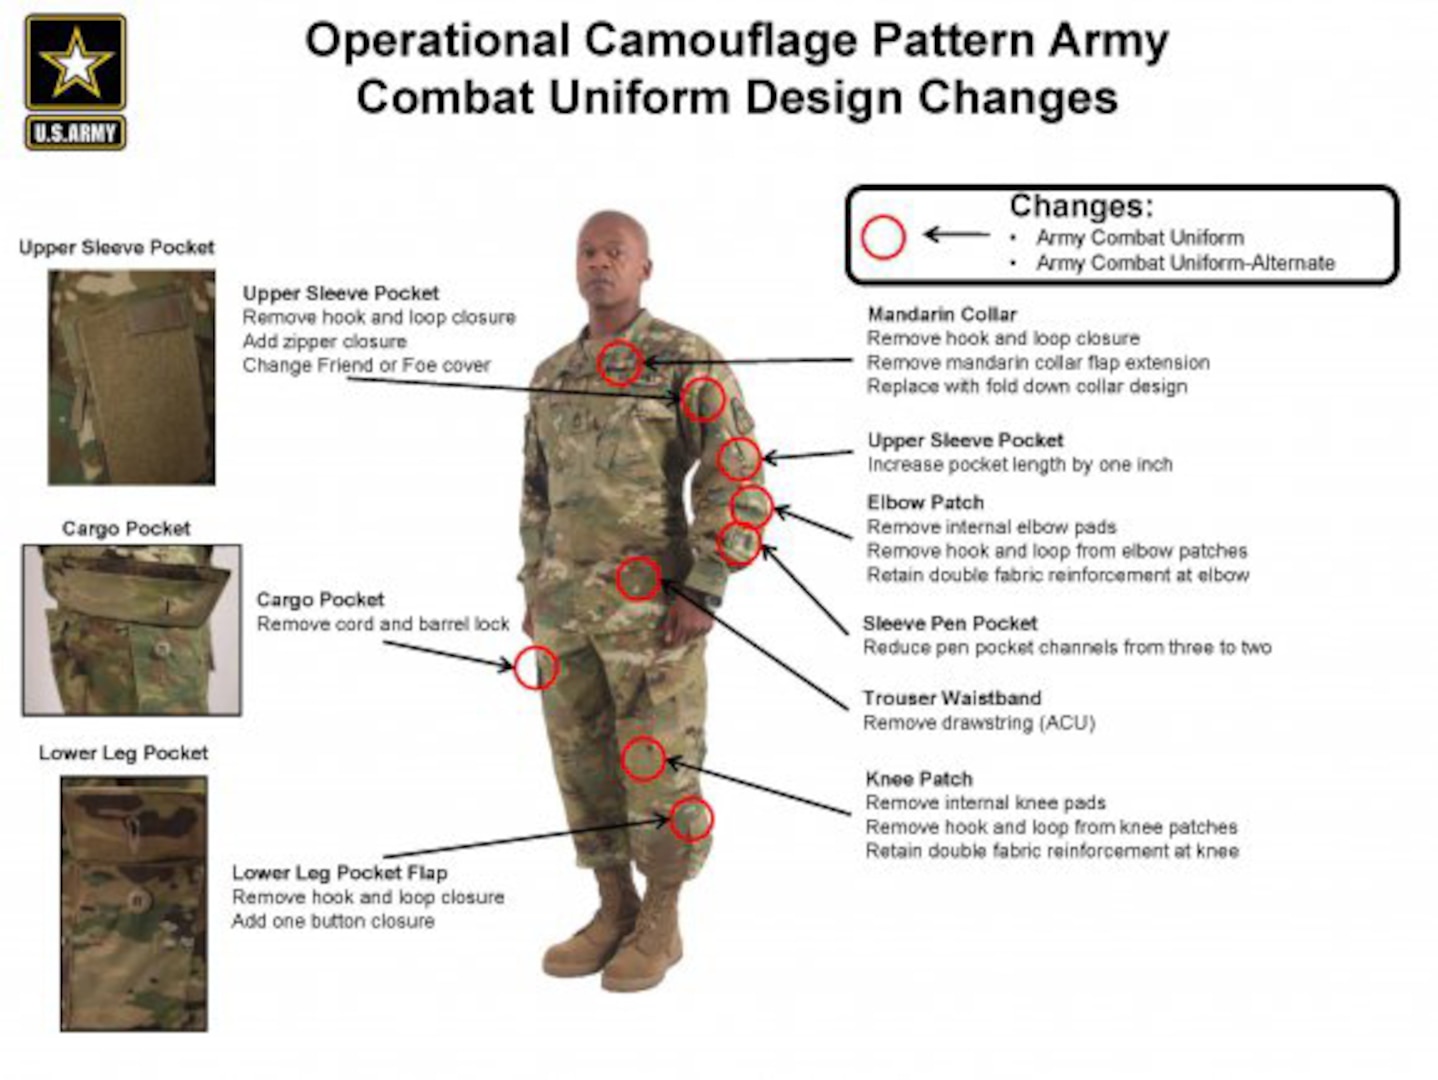 Operational Camouflage Pattern Army Combat Uniforms available July 1 >  National Guard > Article View